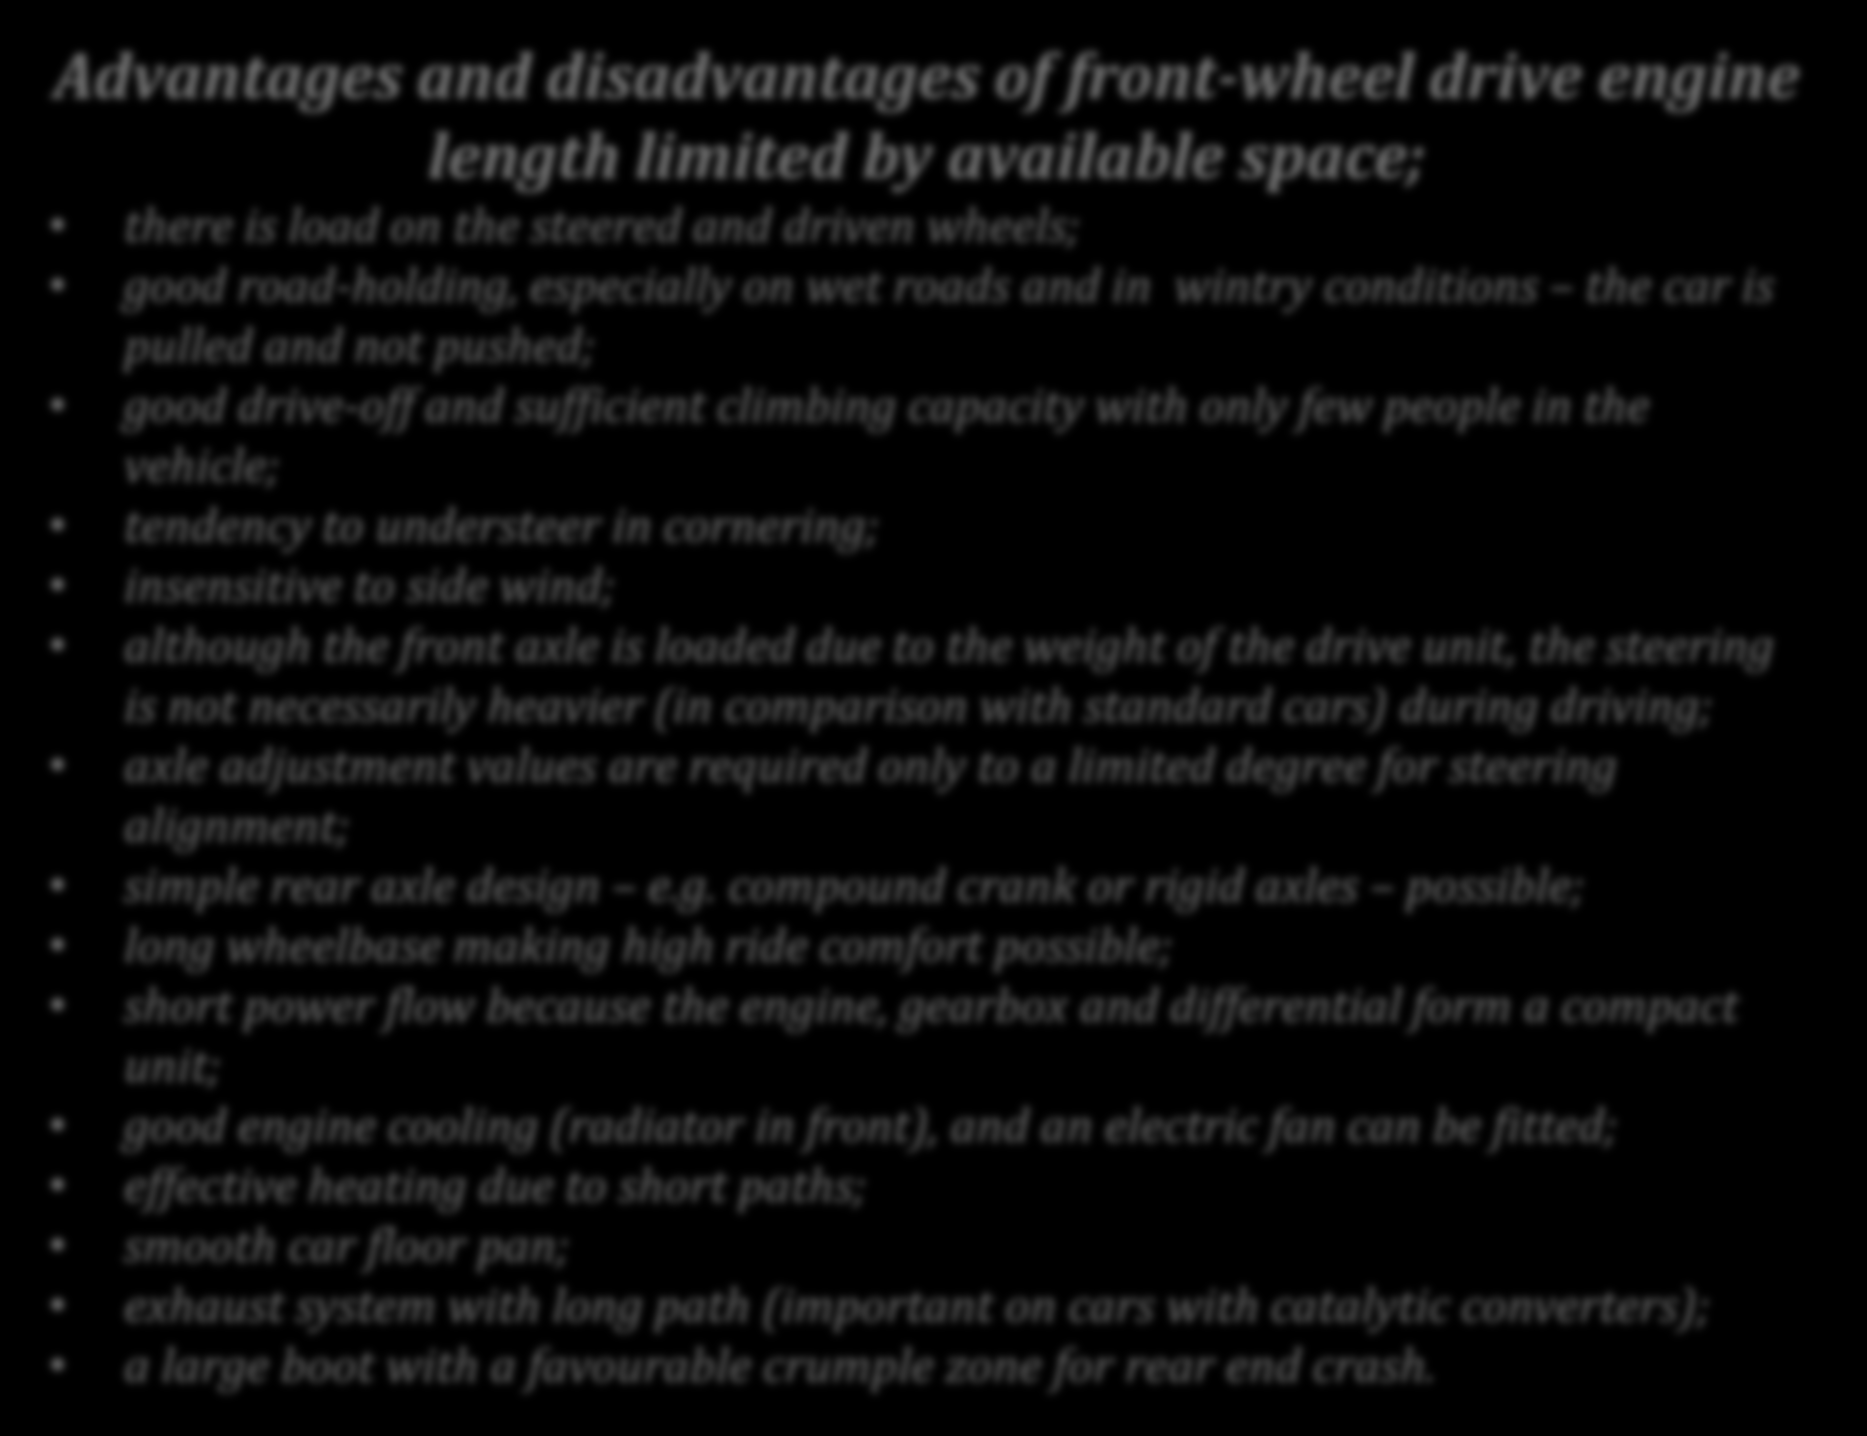 Advantages and disadvantages of front-wheel drive engine length limited by available space; there is load on the steered and driven wheels; good road-holding, especially on wet roads and in wintry